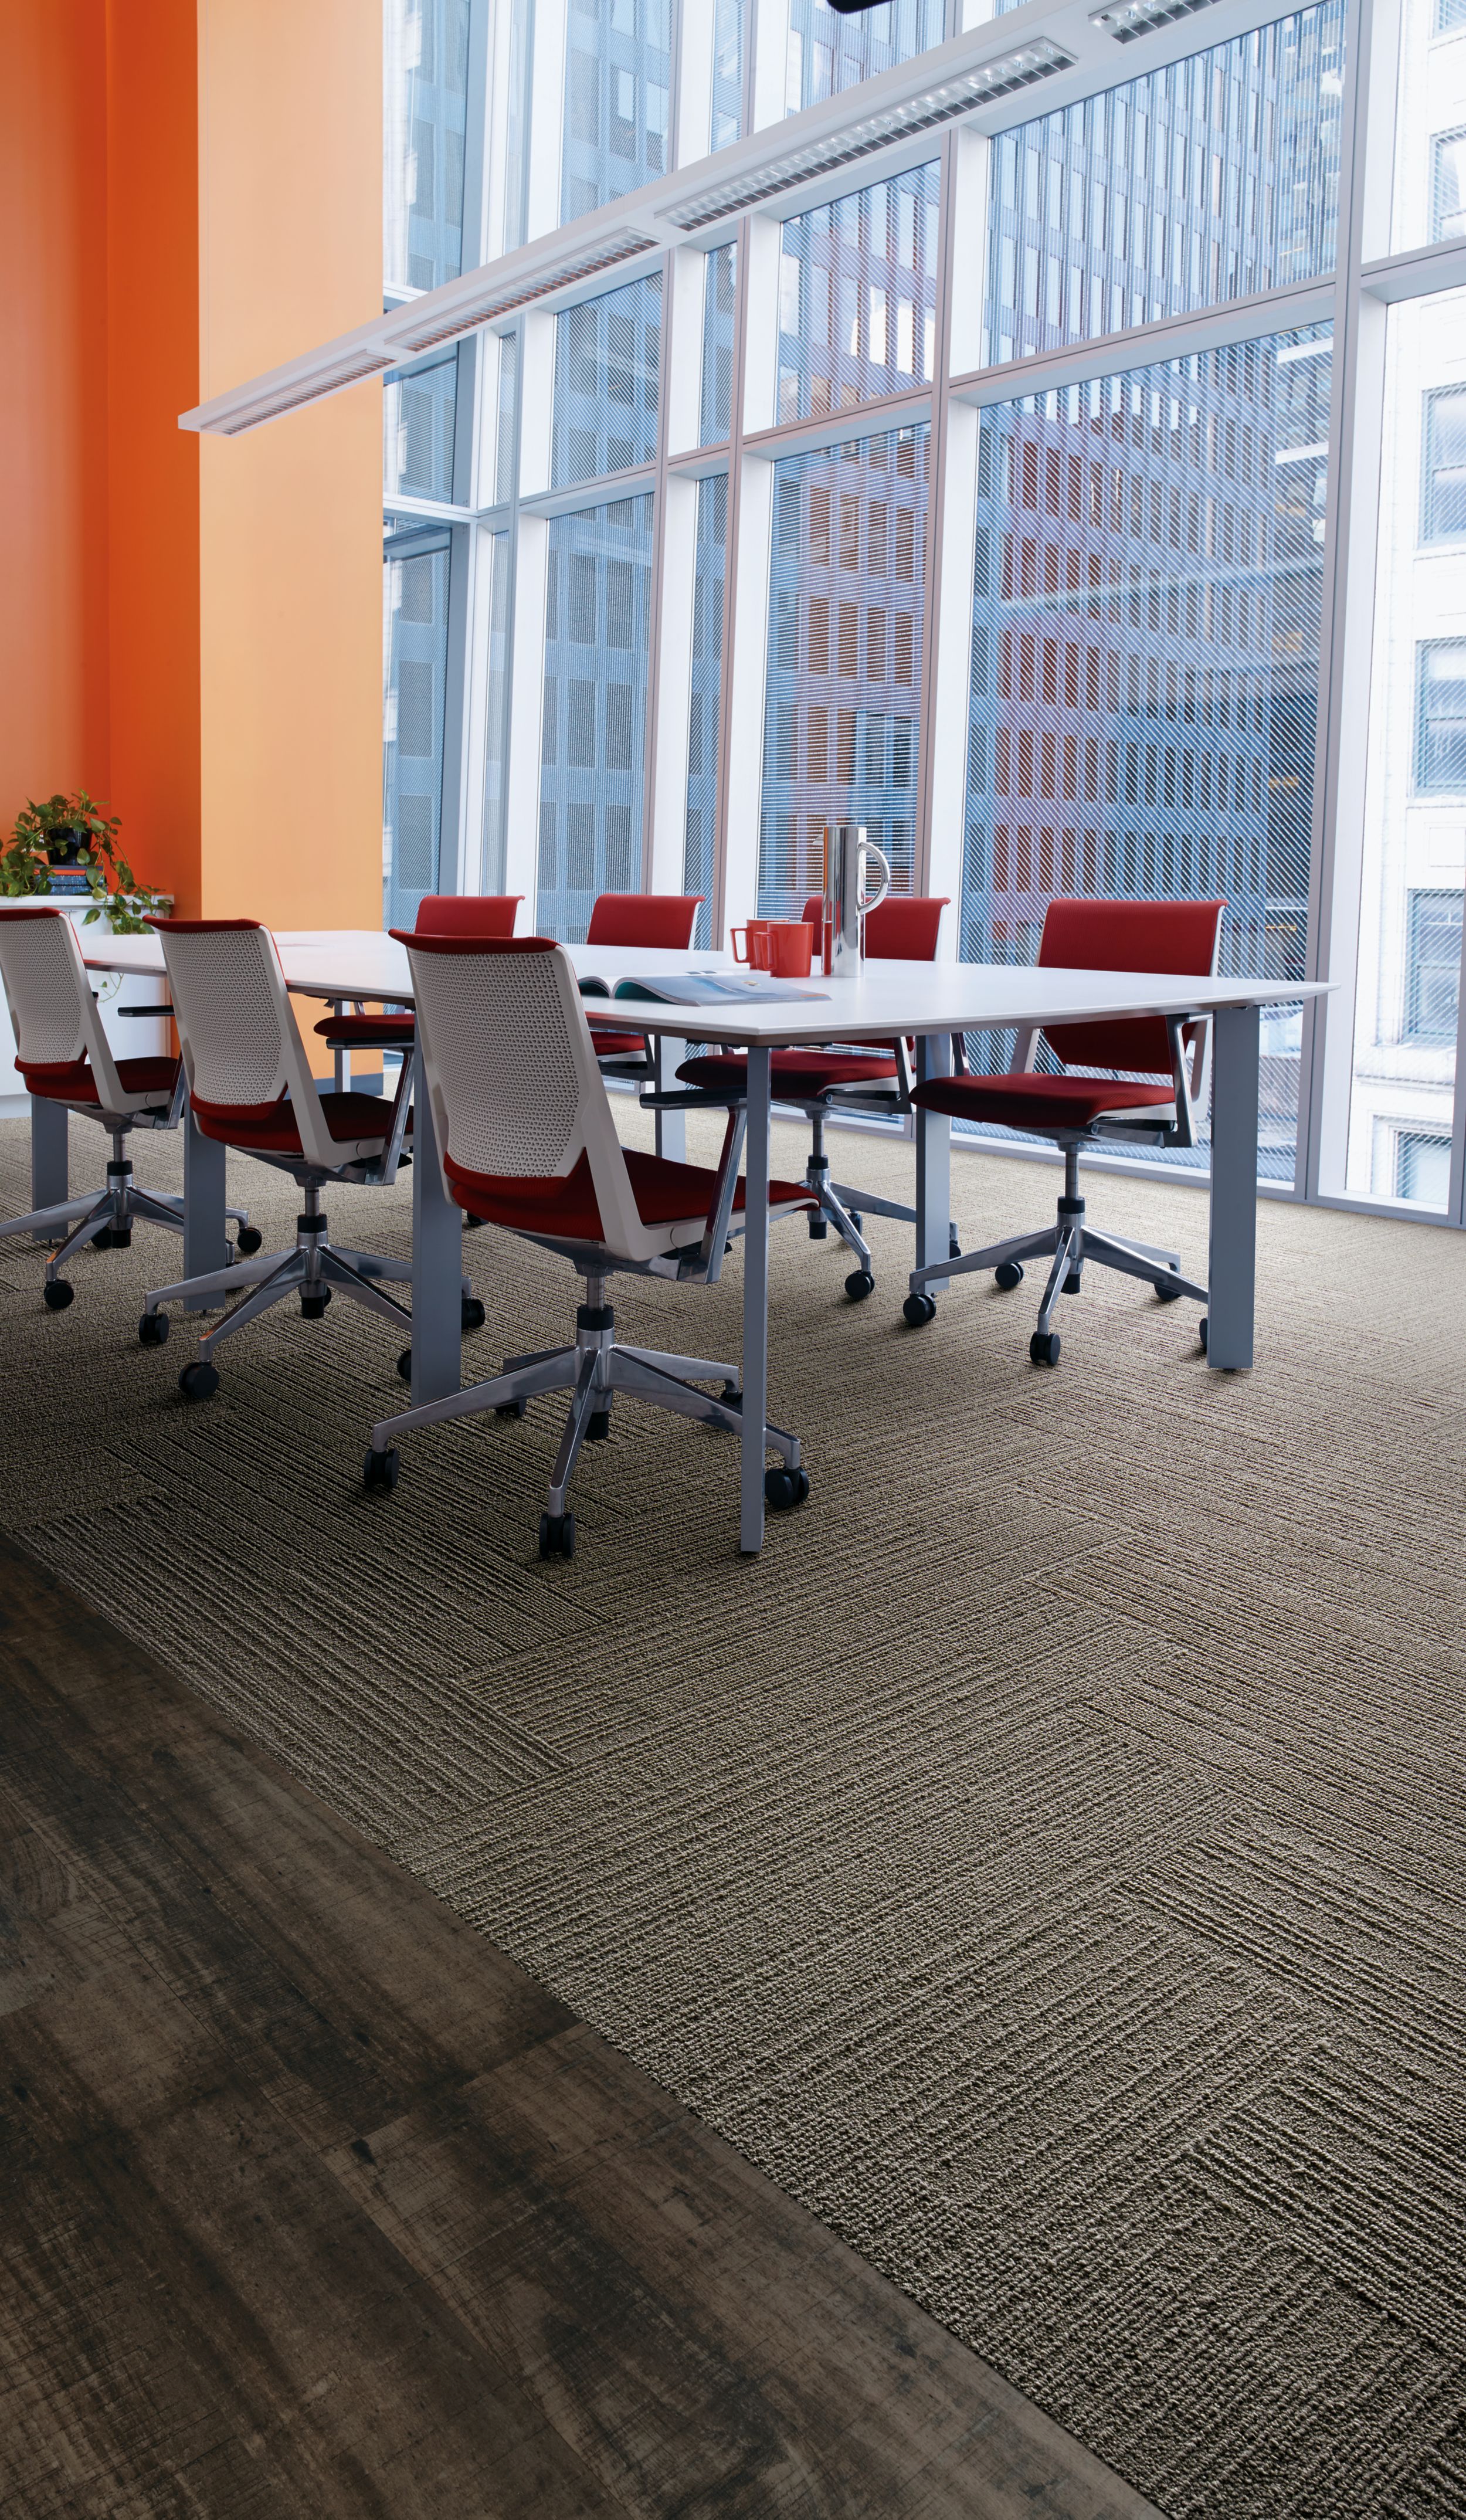 Interface On Line plank carpet tile in meeting room with orange wall and red chairs número de imagen 8